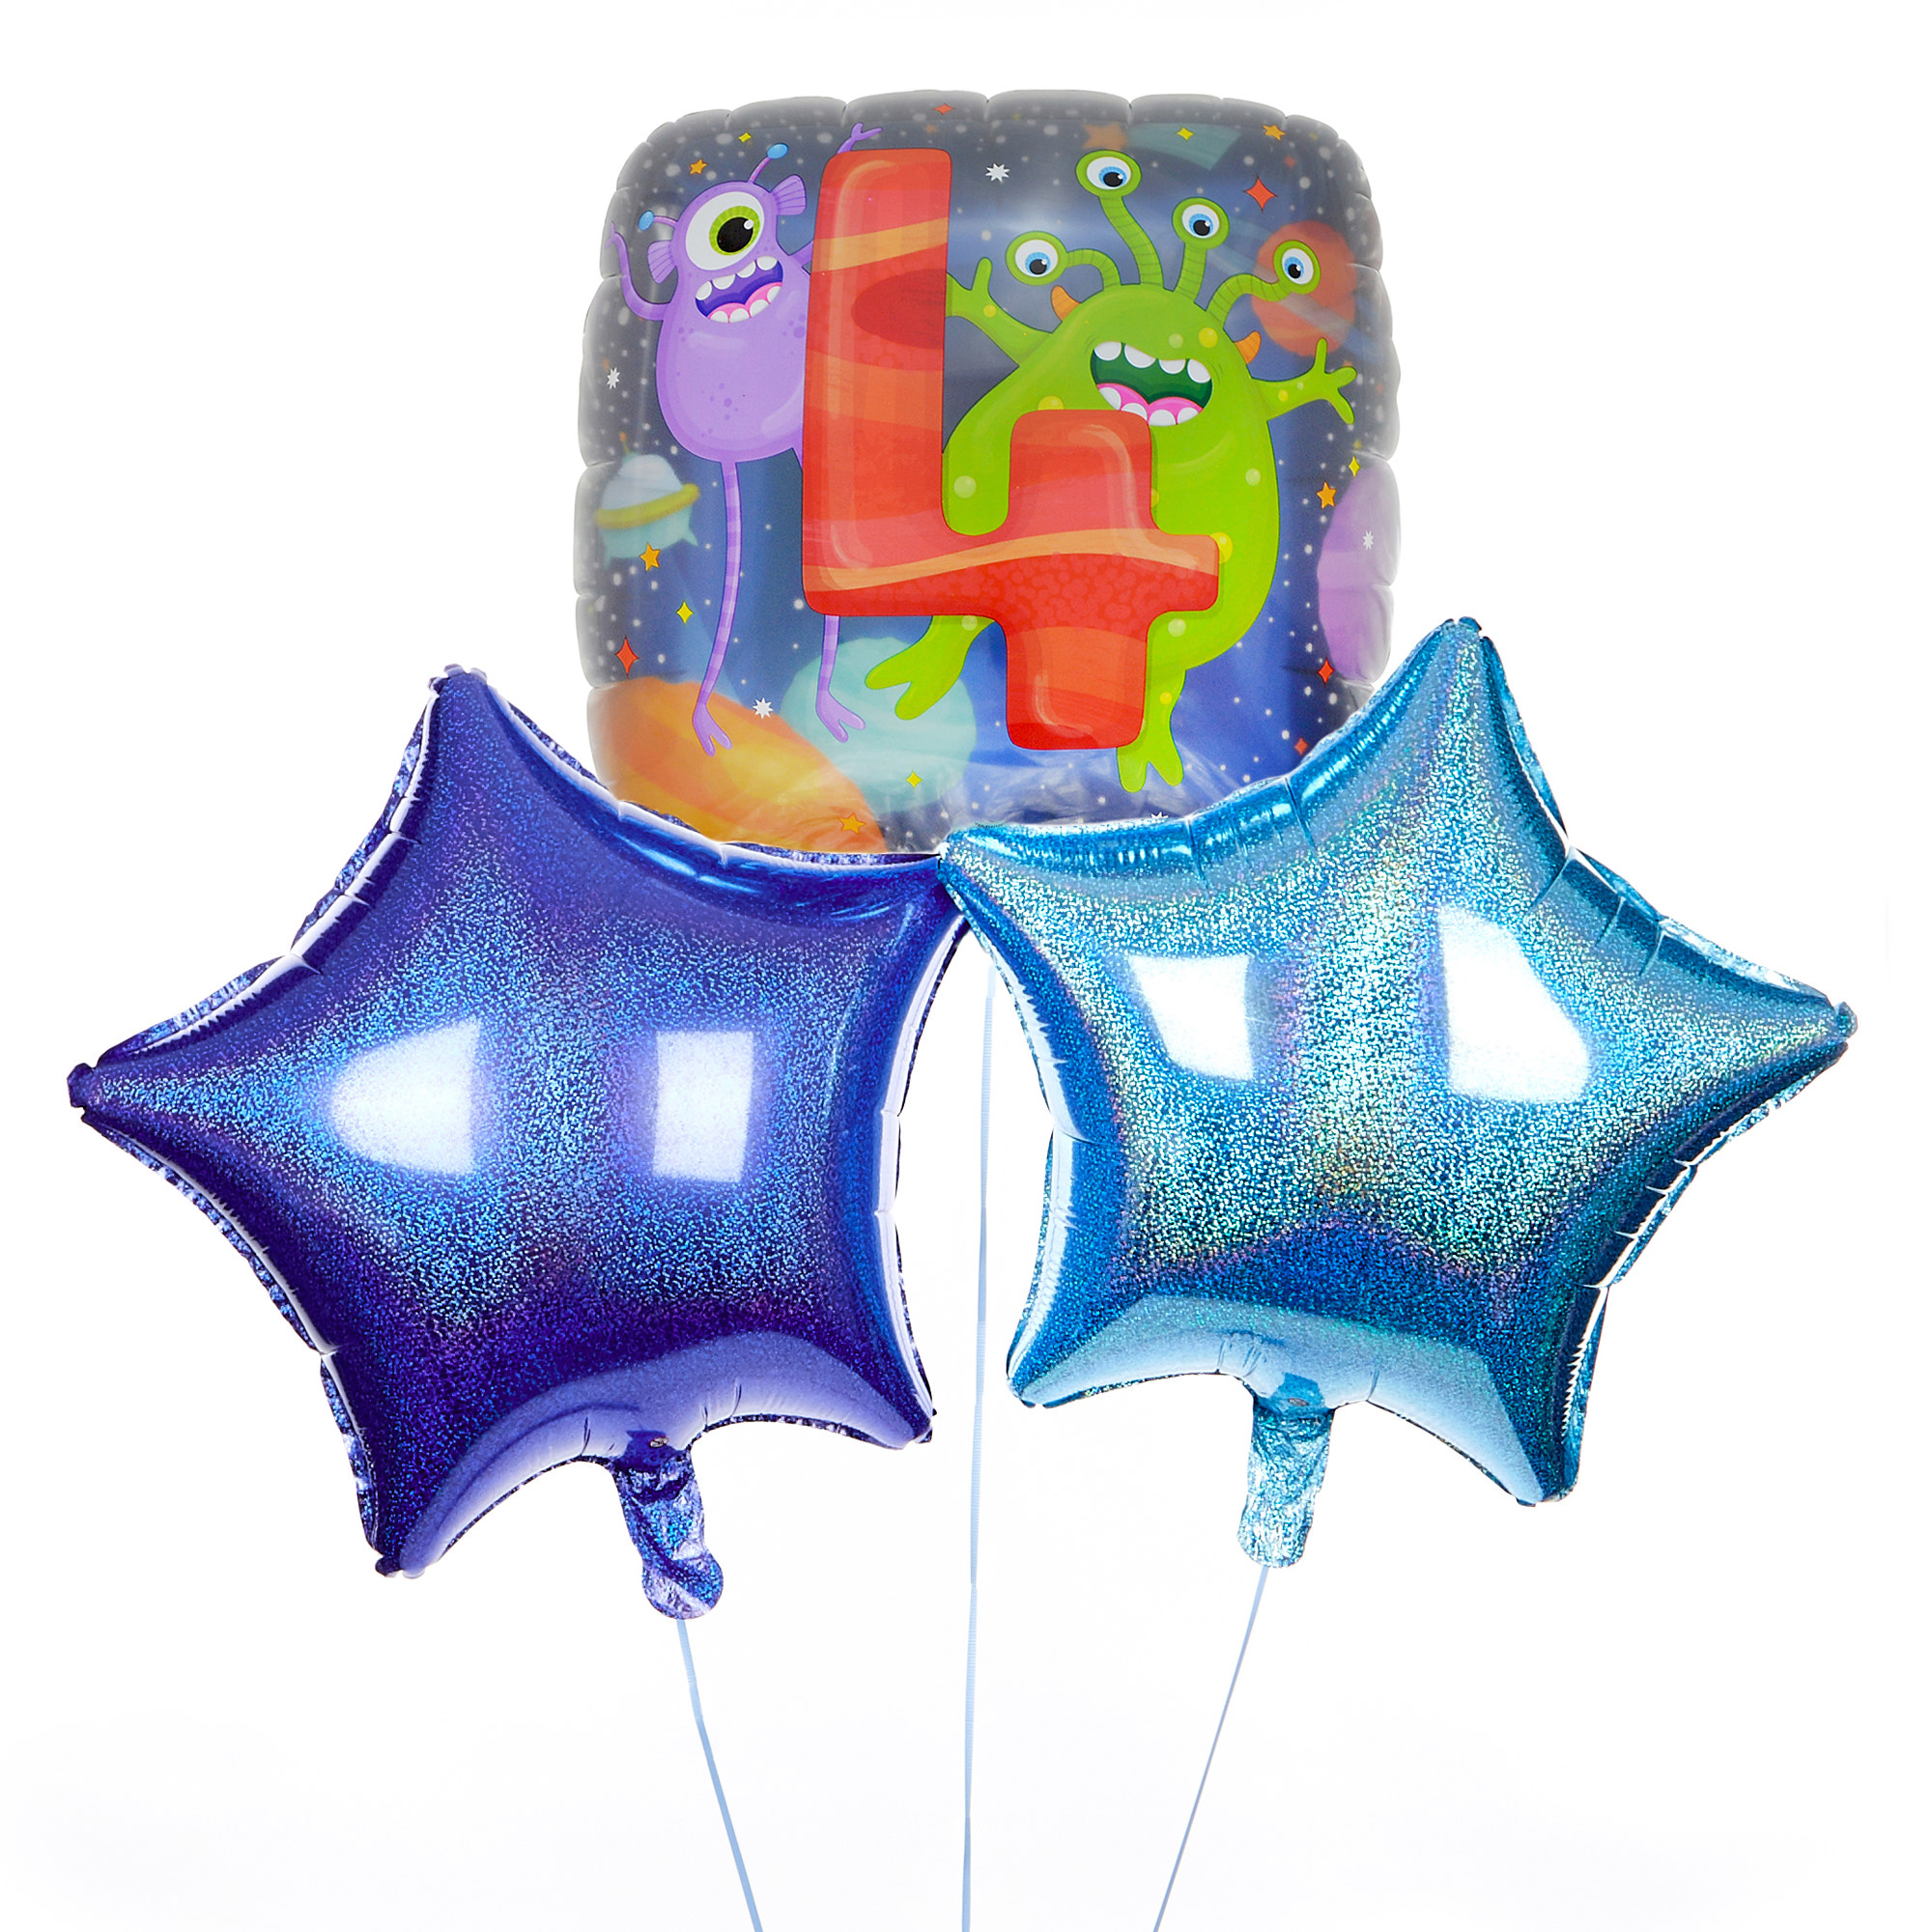 Monster Themed 4th Birthday Balloon Bouquet - DELIVERED INFLATED!